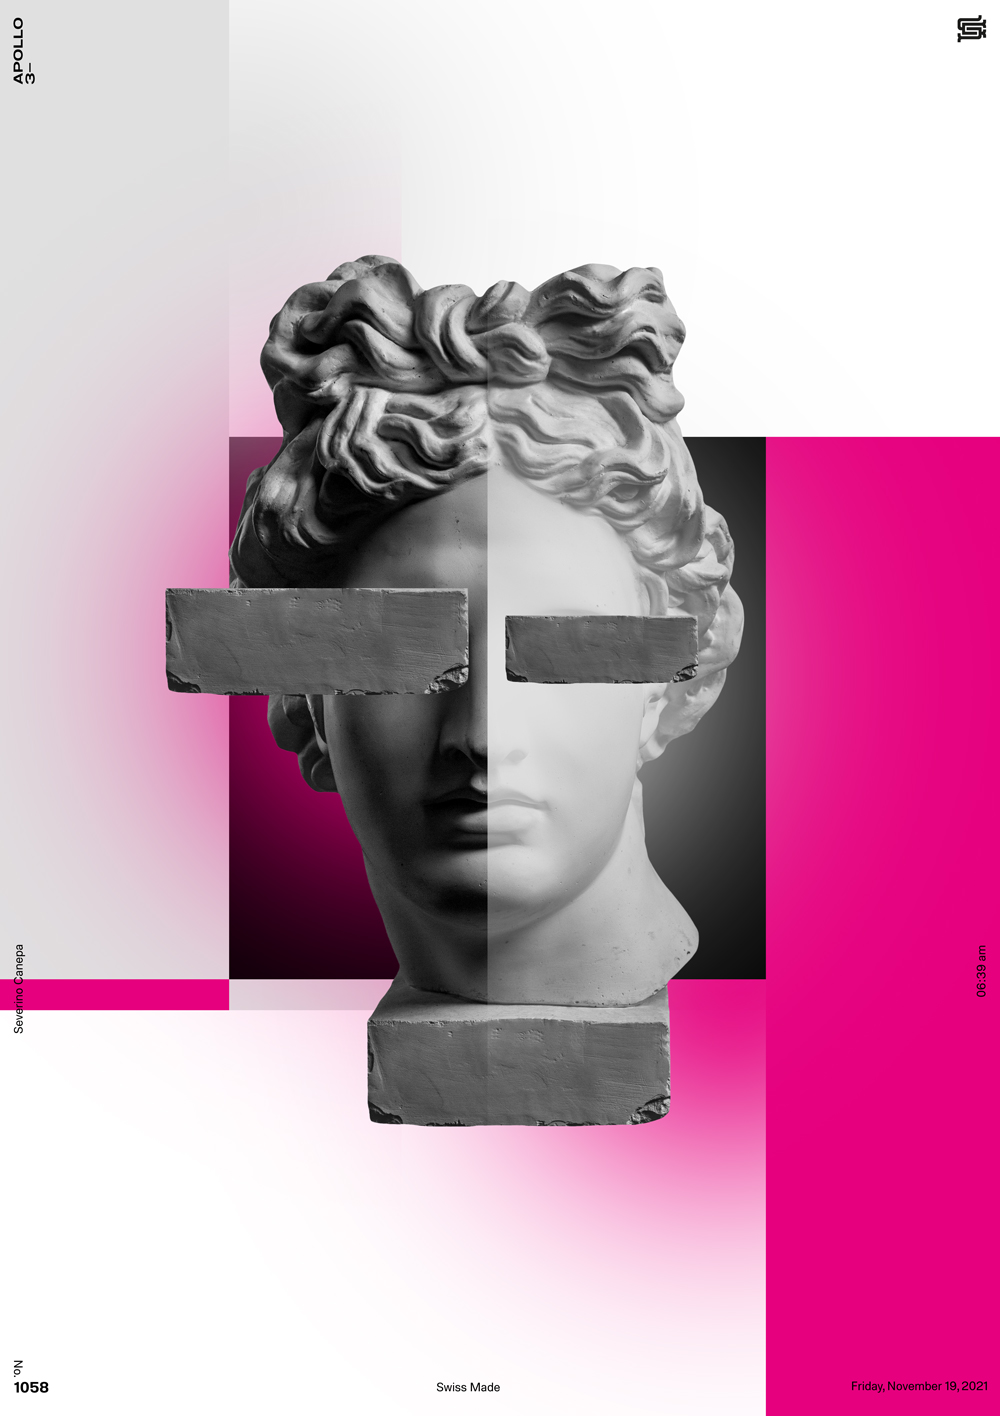 Digital design I created with blur gradient, Apollo's Statue, and typography